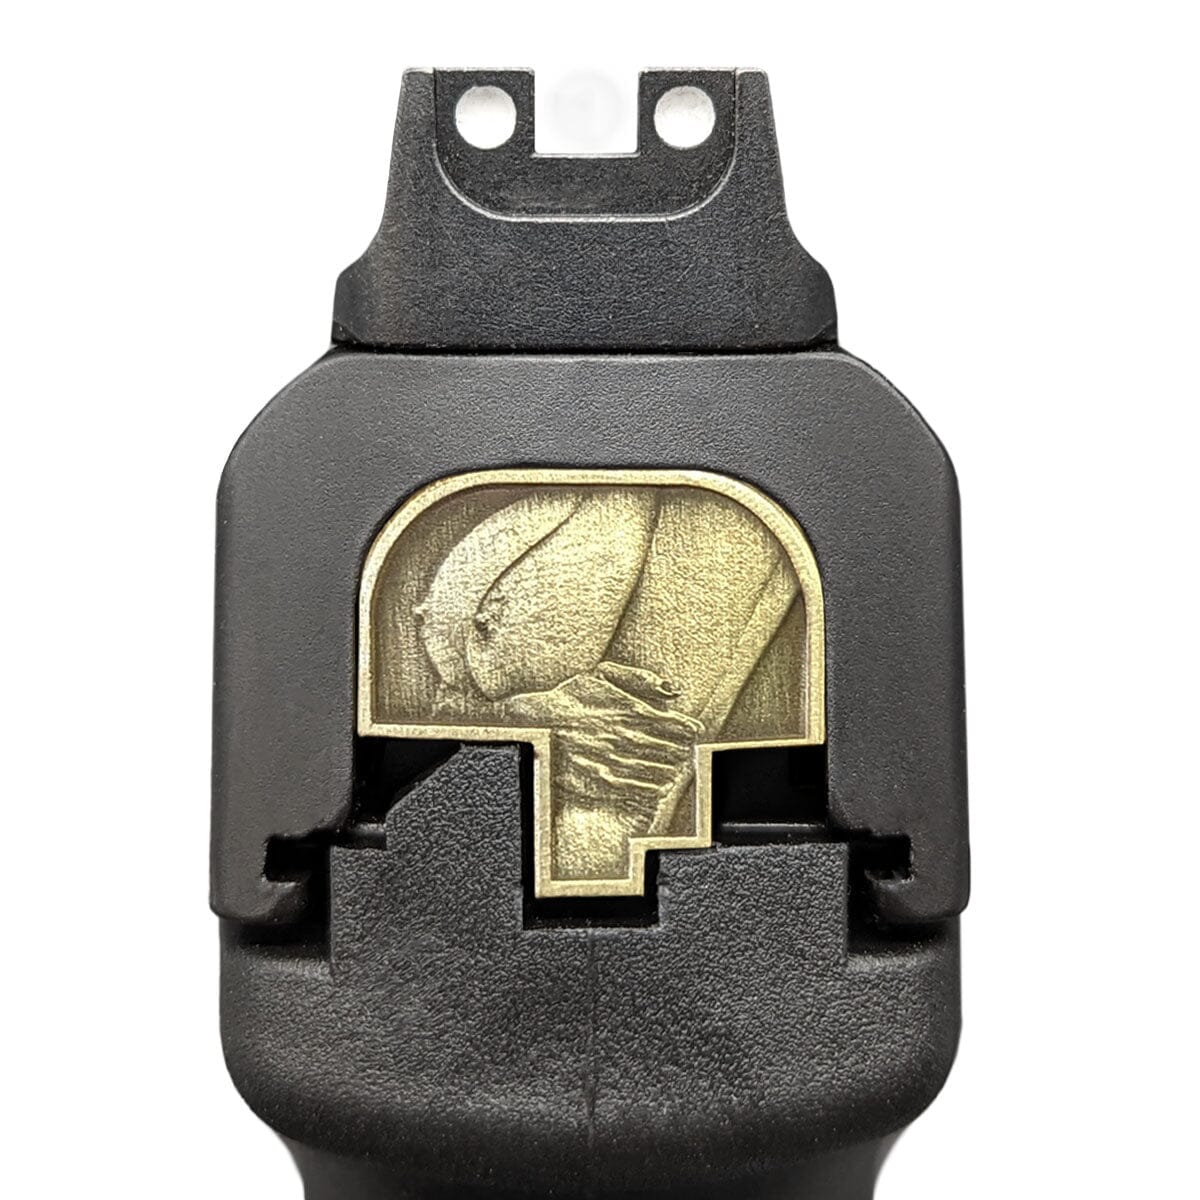 Left Facing Knockers 3D Slide Back Plate - S&W Smith & Wesson Back Plate Milspin Bare Brass 